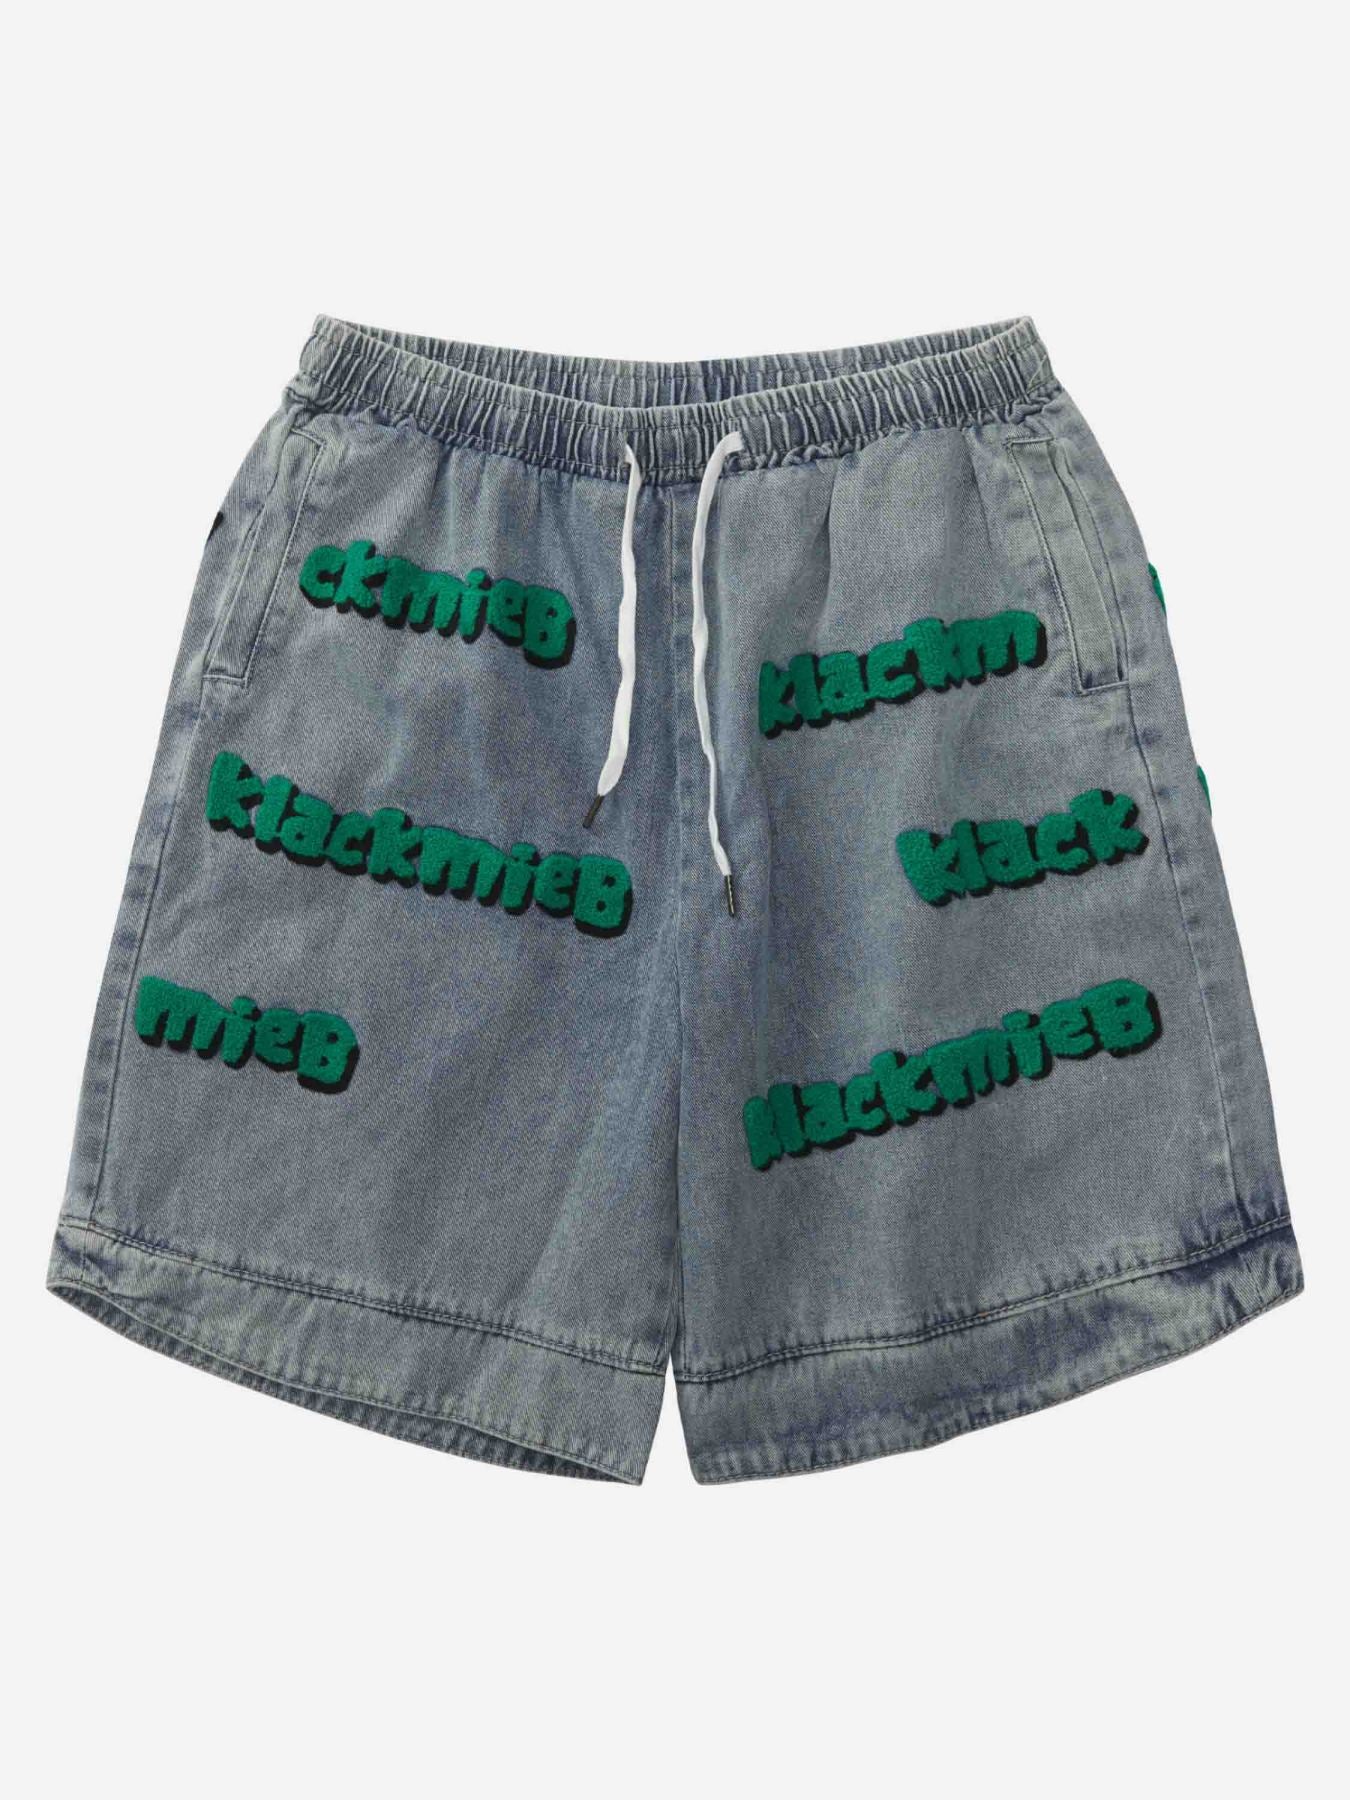 Thesupermade Embroidered Denim Shorts